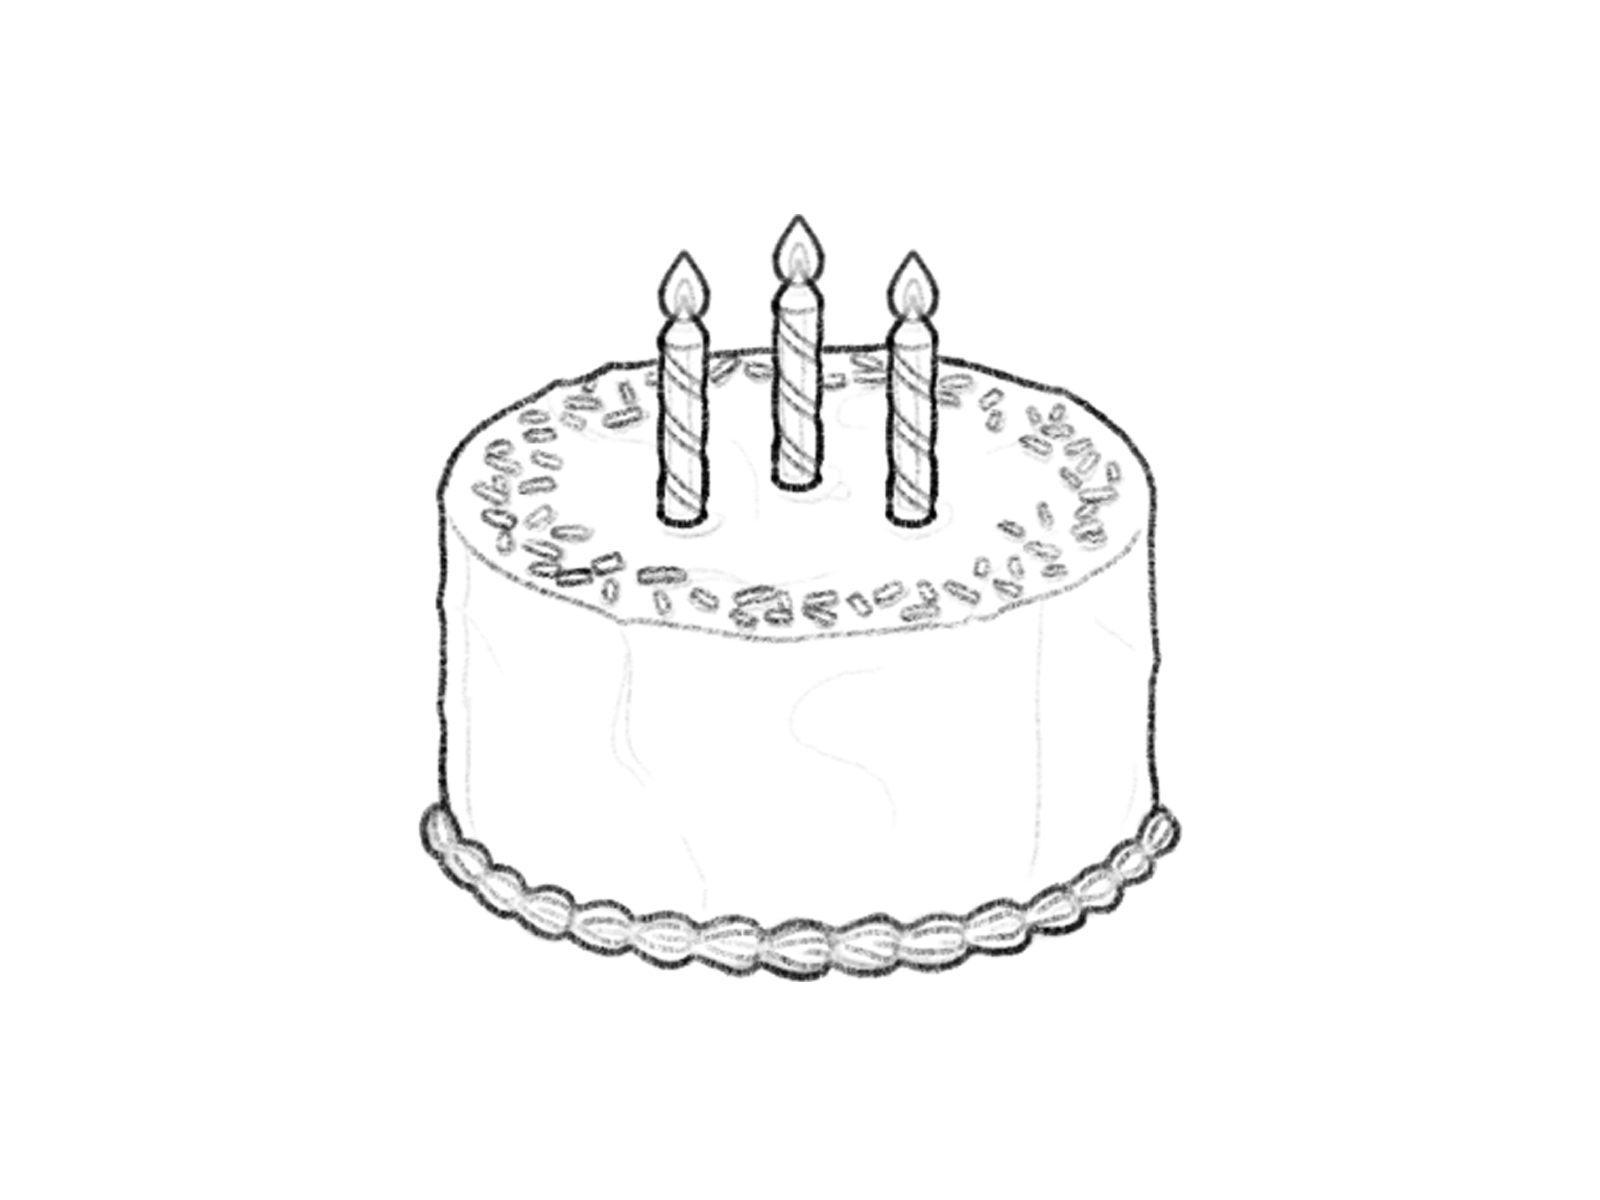 Cake drawing Images  Search Images on Everypixel